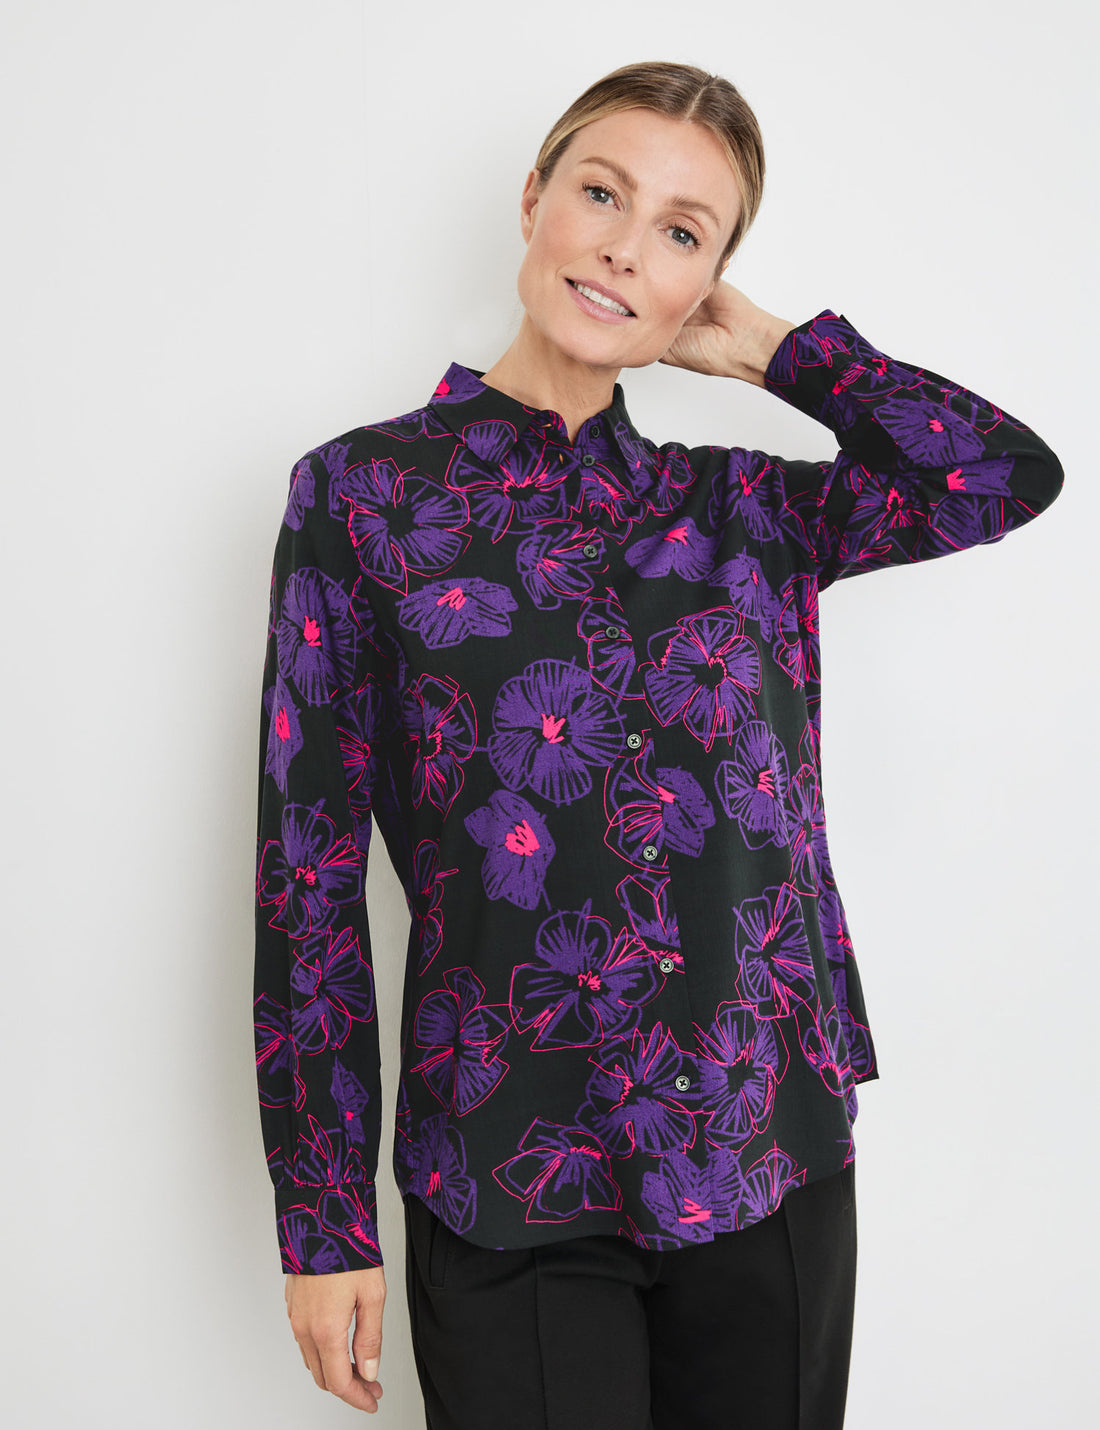 Long Sleeve Blouse With A Floral Pattern_260050-31445_1038_01